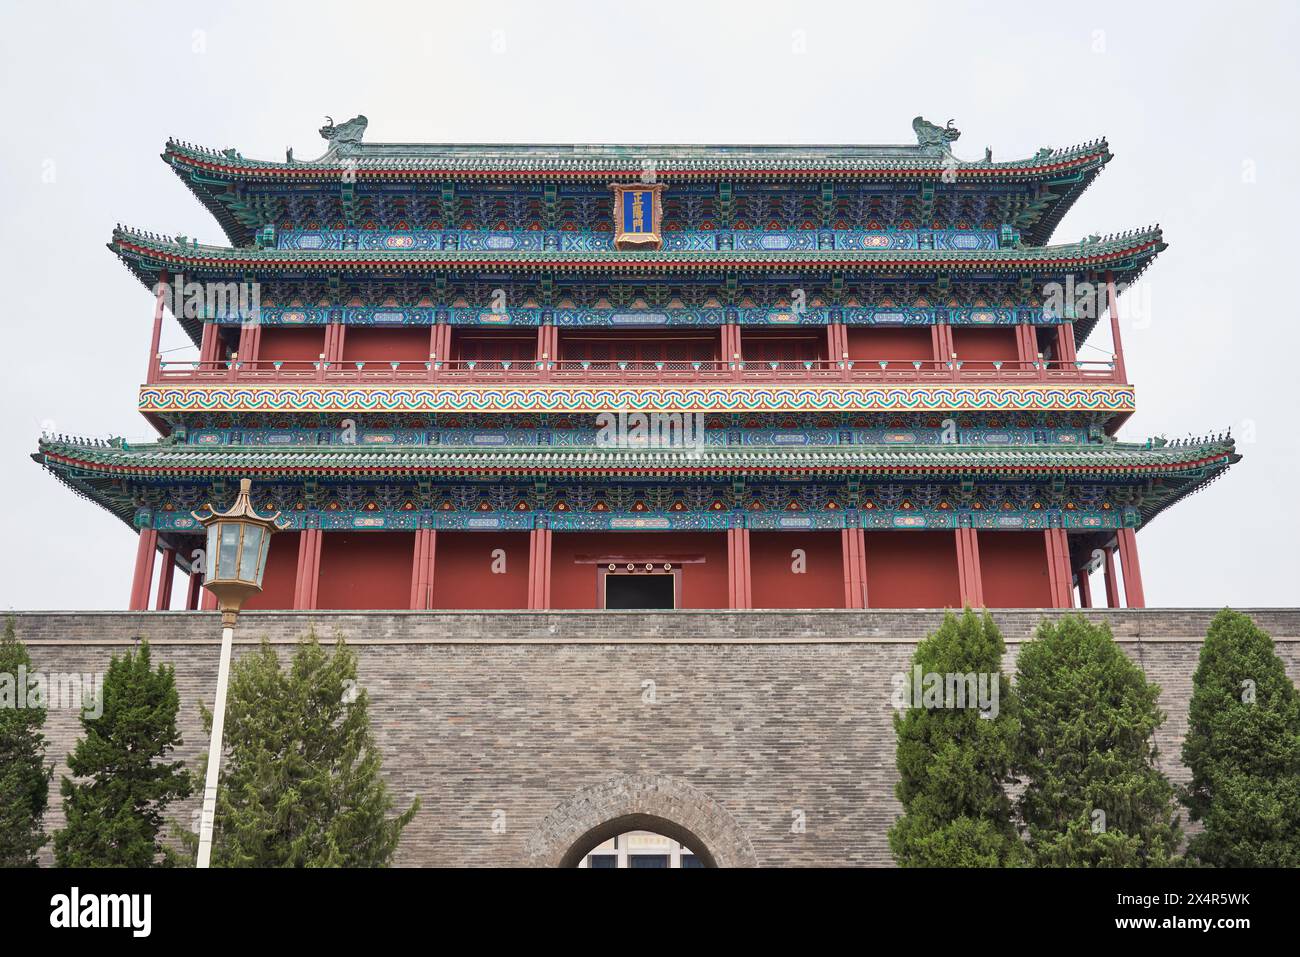 Archery tower of the historic Zhengyangmen gate in Qianmen street, located to the south of Tiananmen Square in Beijing, China on 19 April 2024 Stock Photo